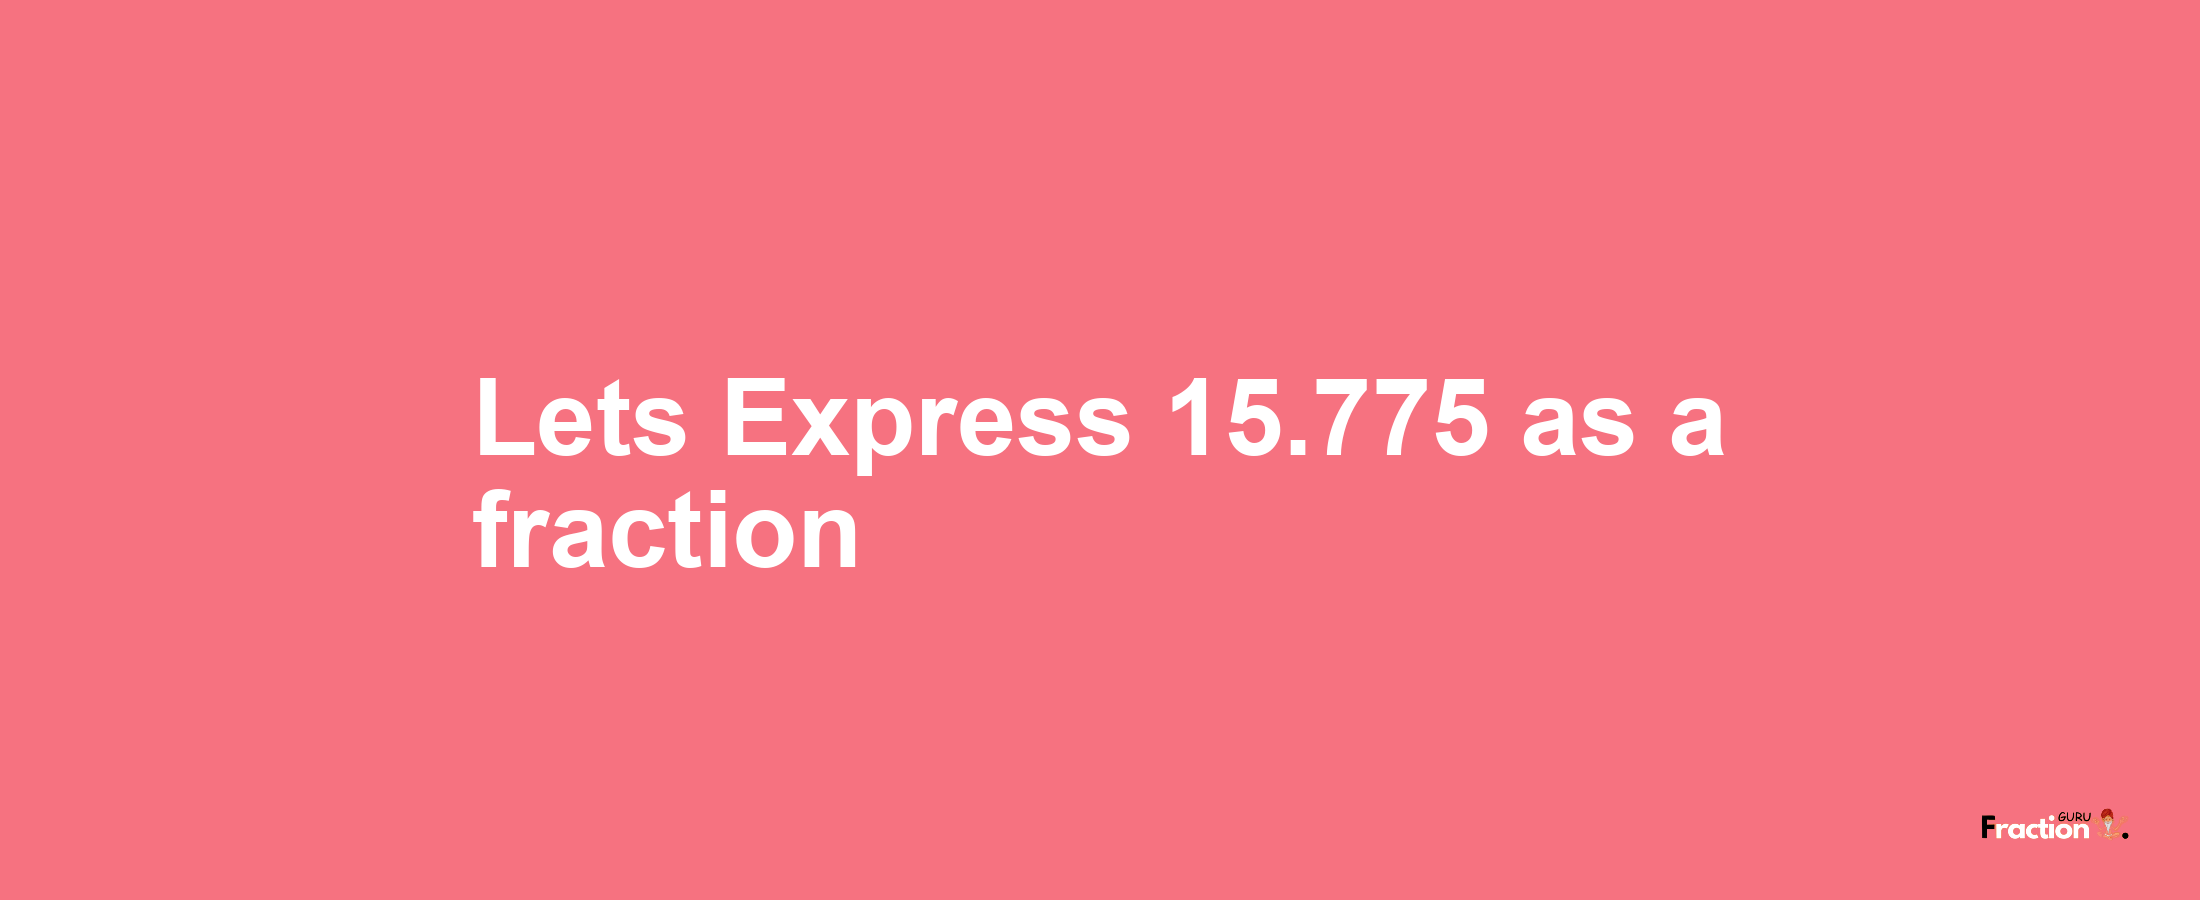 Lets Express 15.775 as afraction